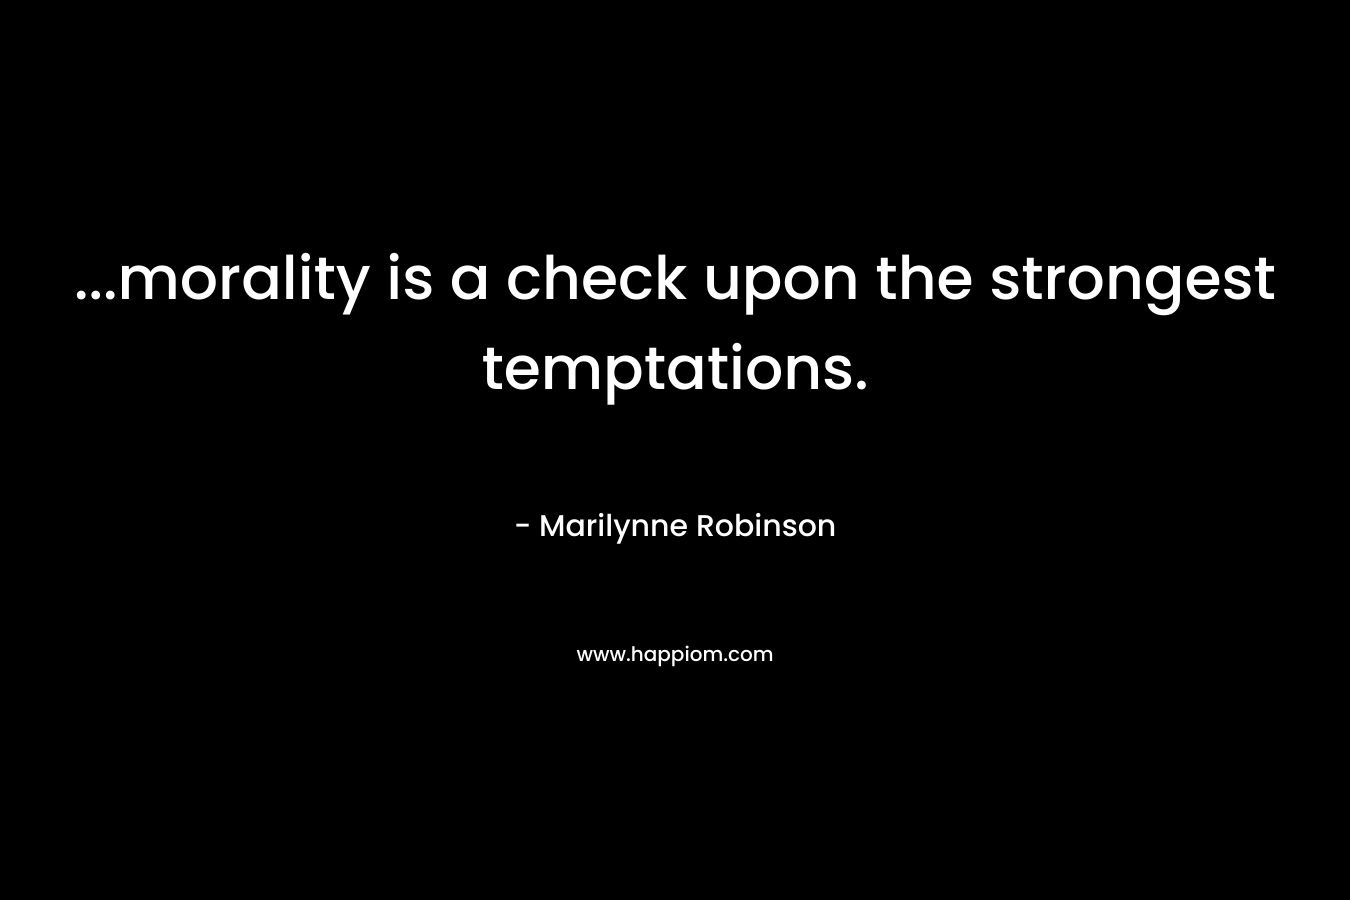 …morality is a check upon the strongest temptations. – Marilynne Robinson